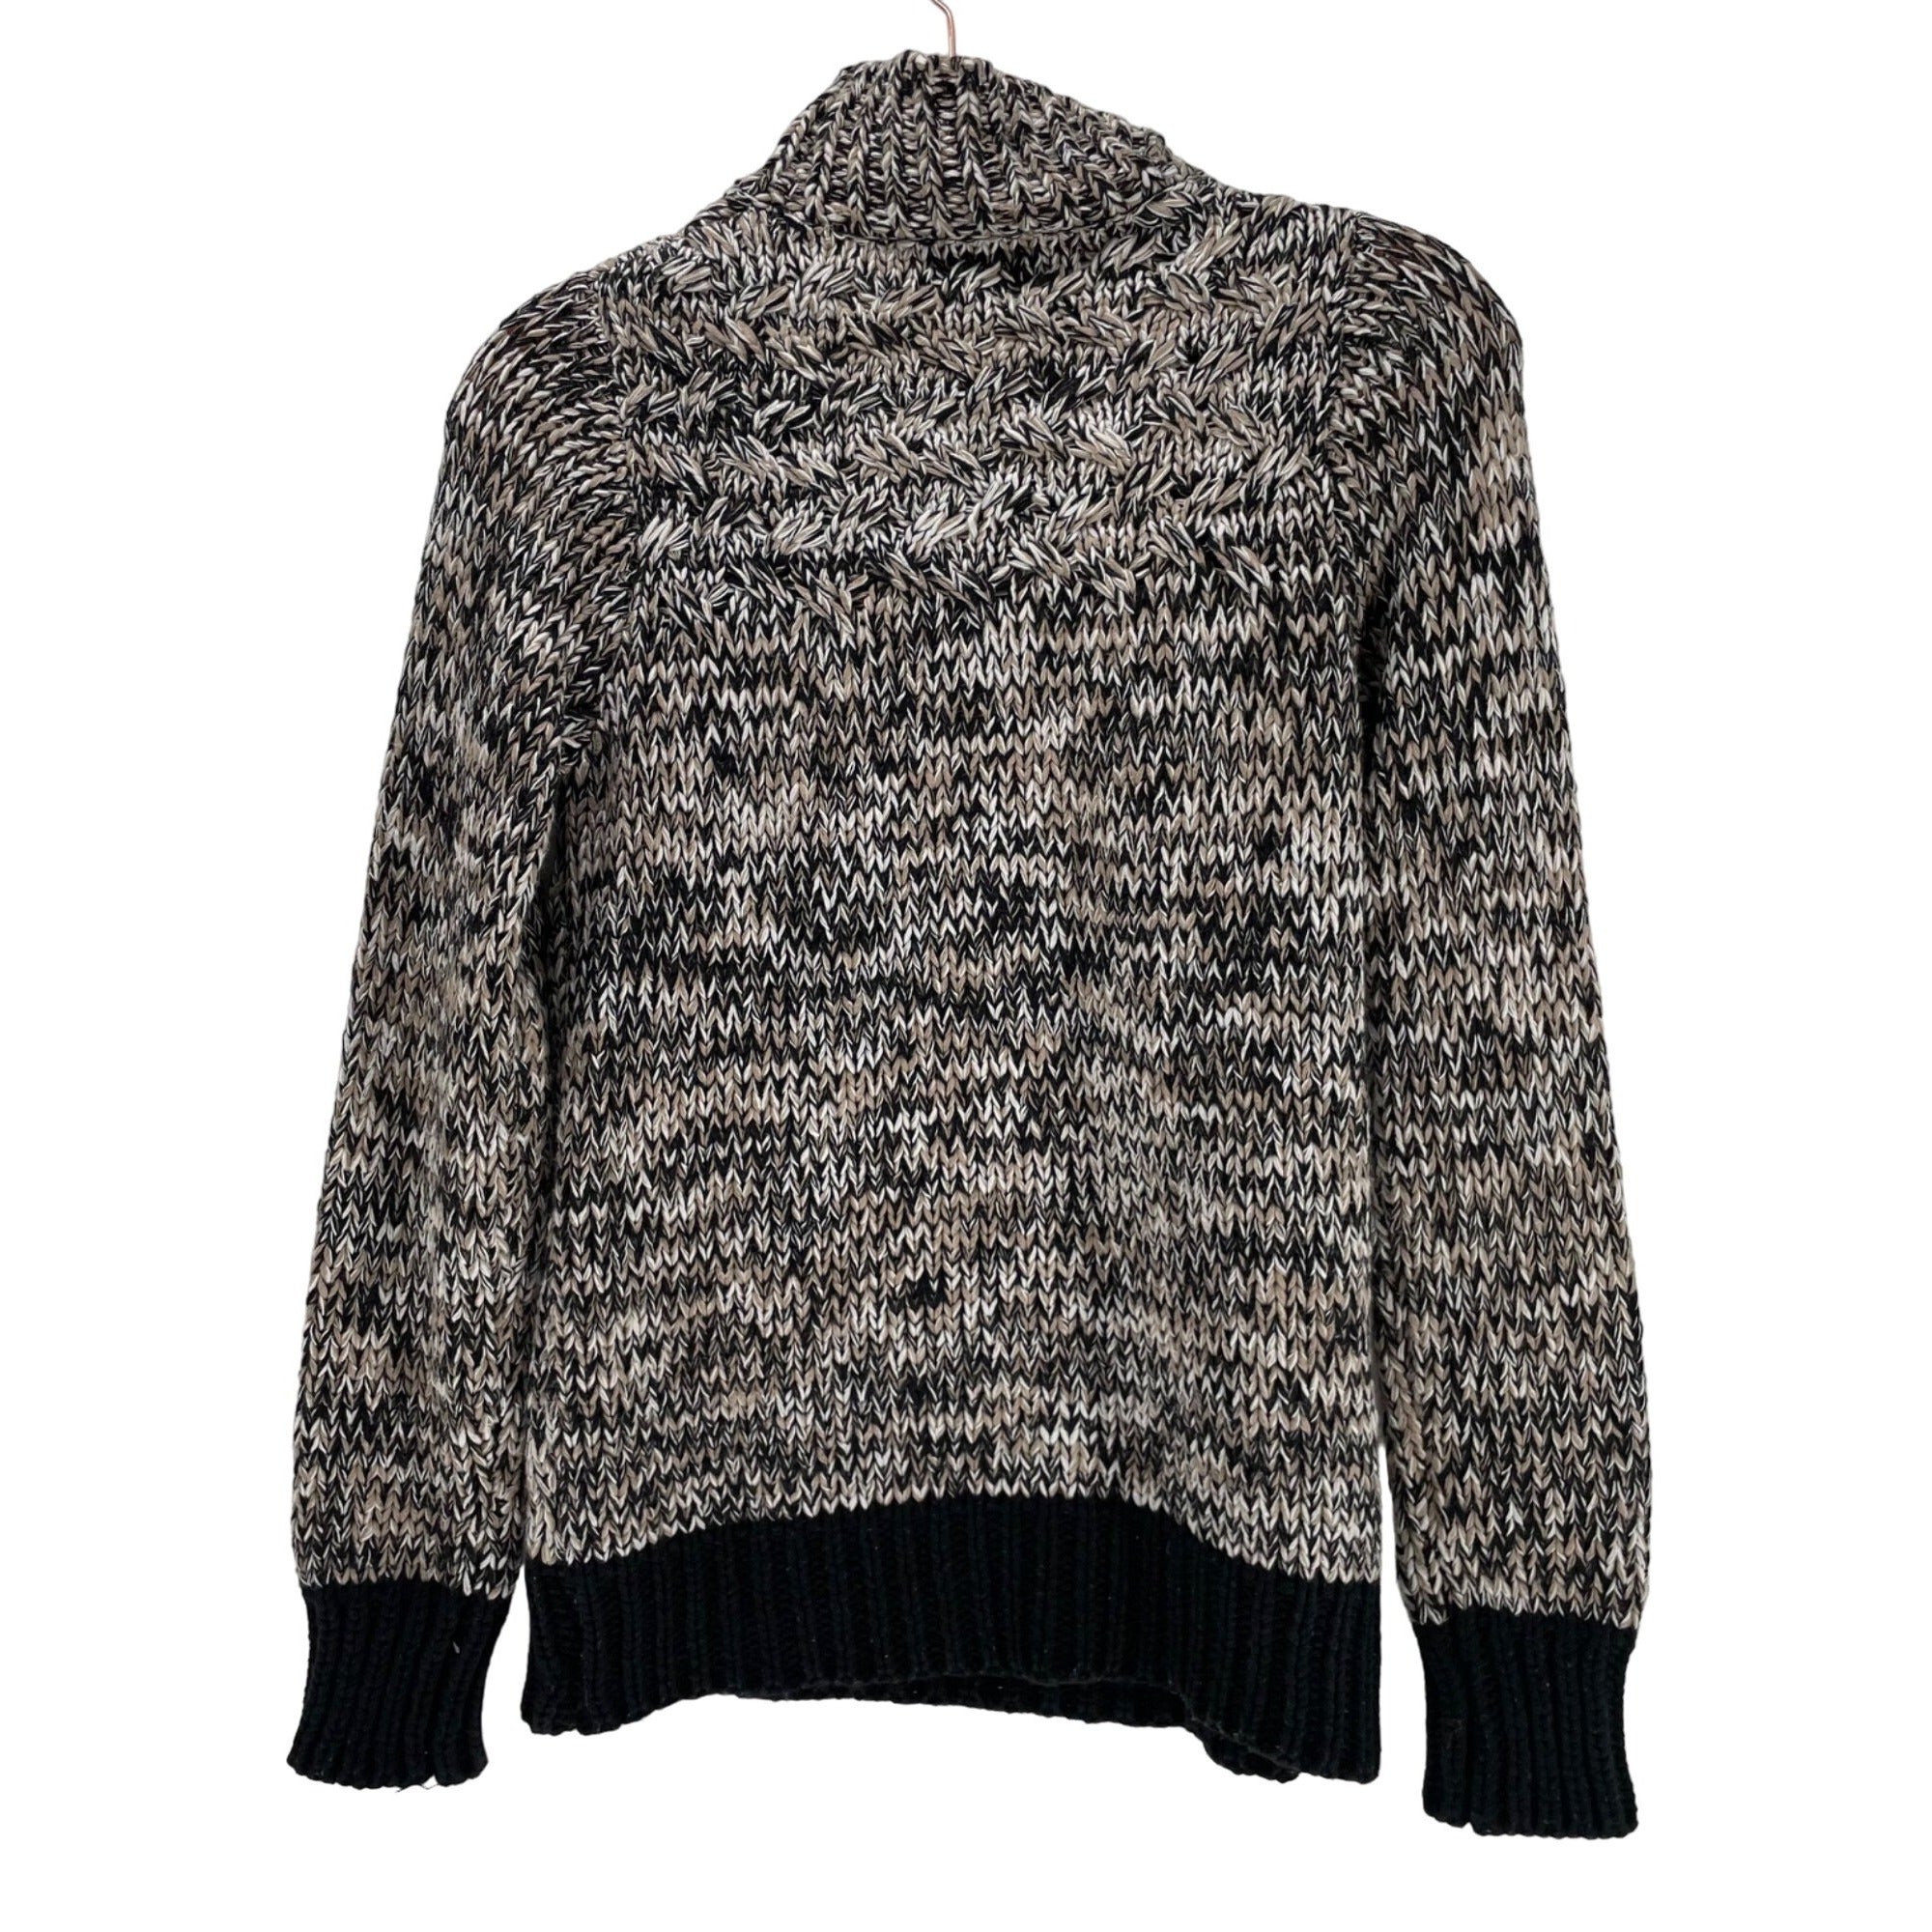 Philosophy Women’s XS Black, Brown and White Sweater